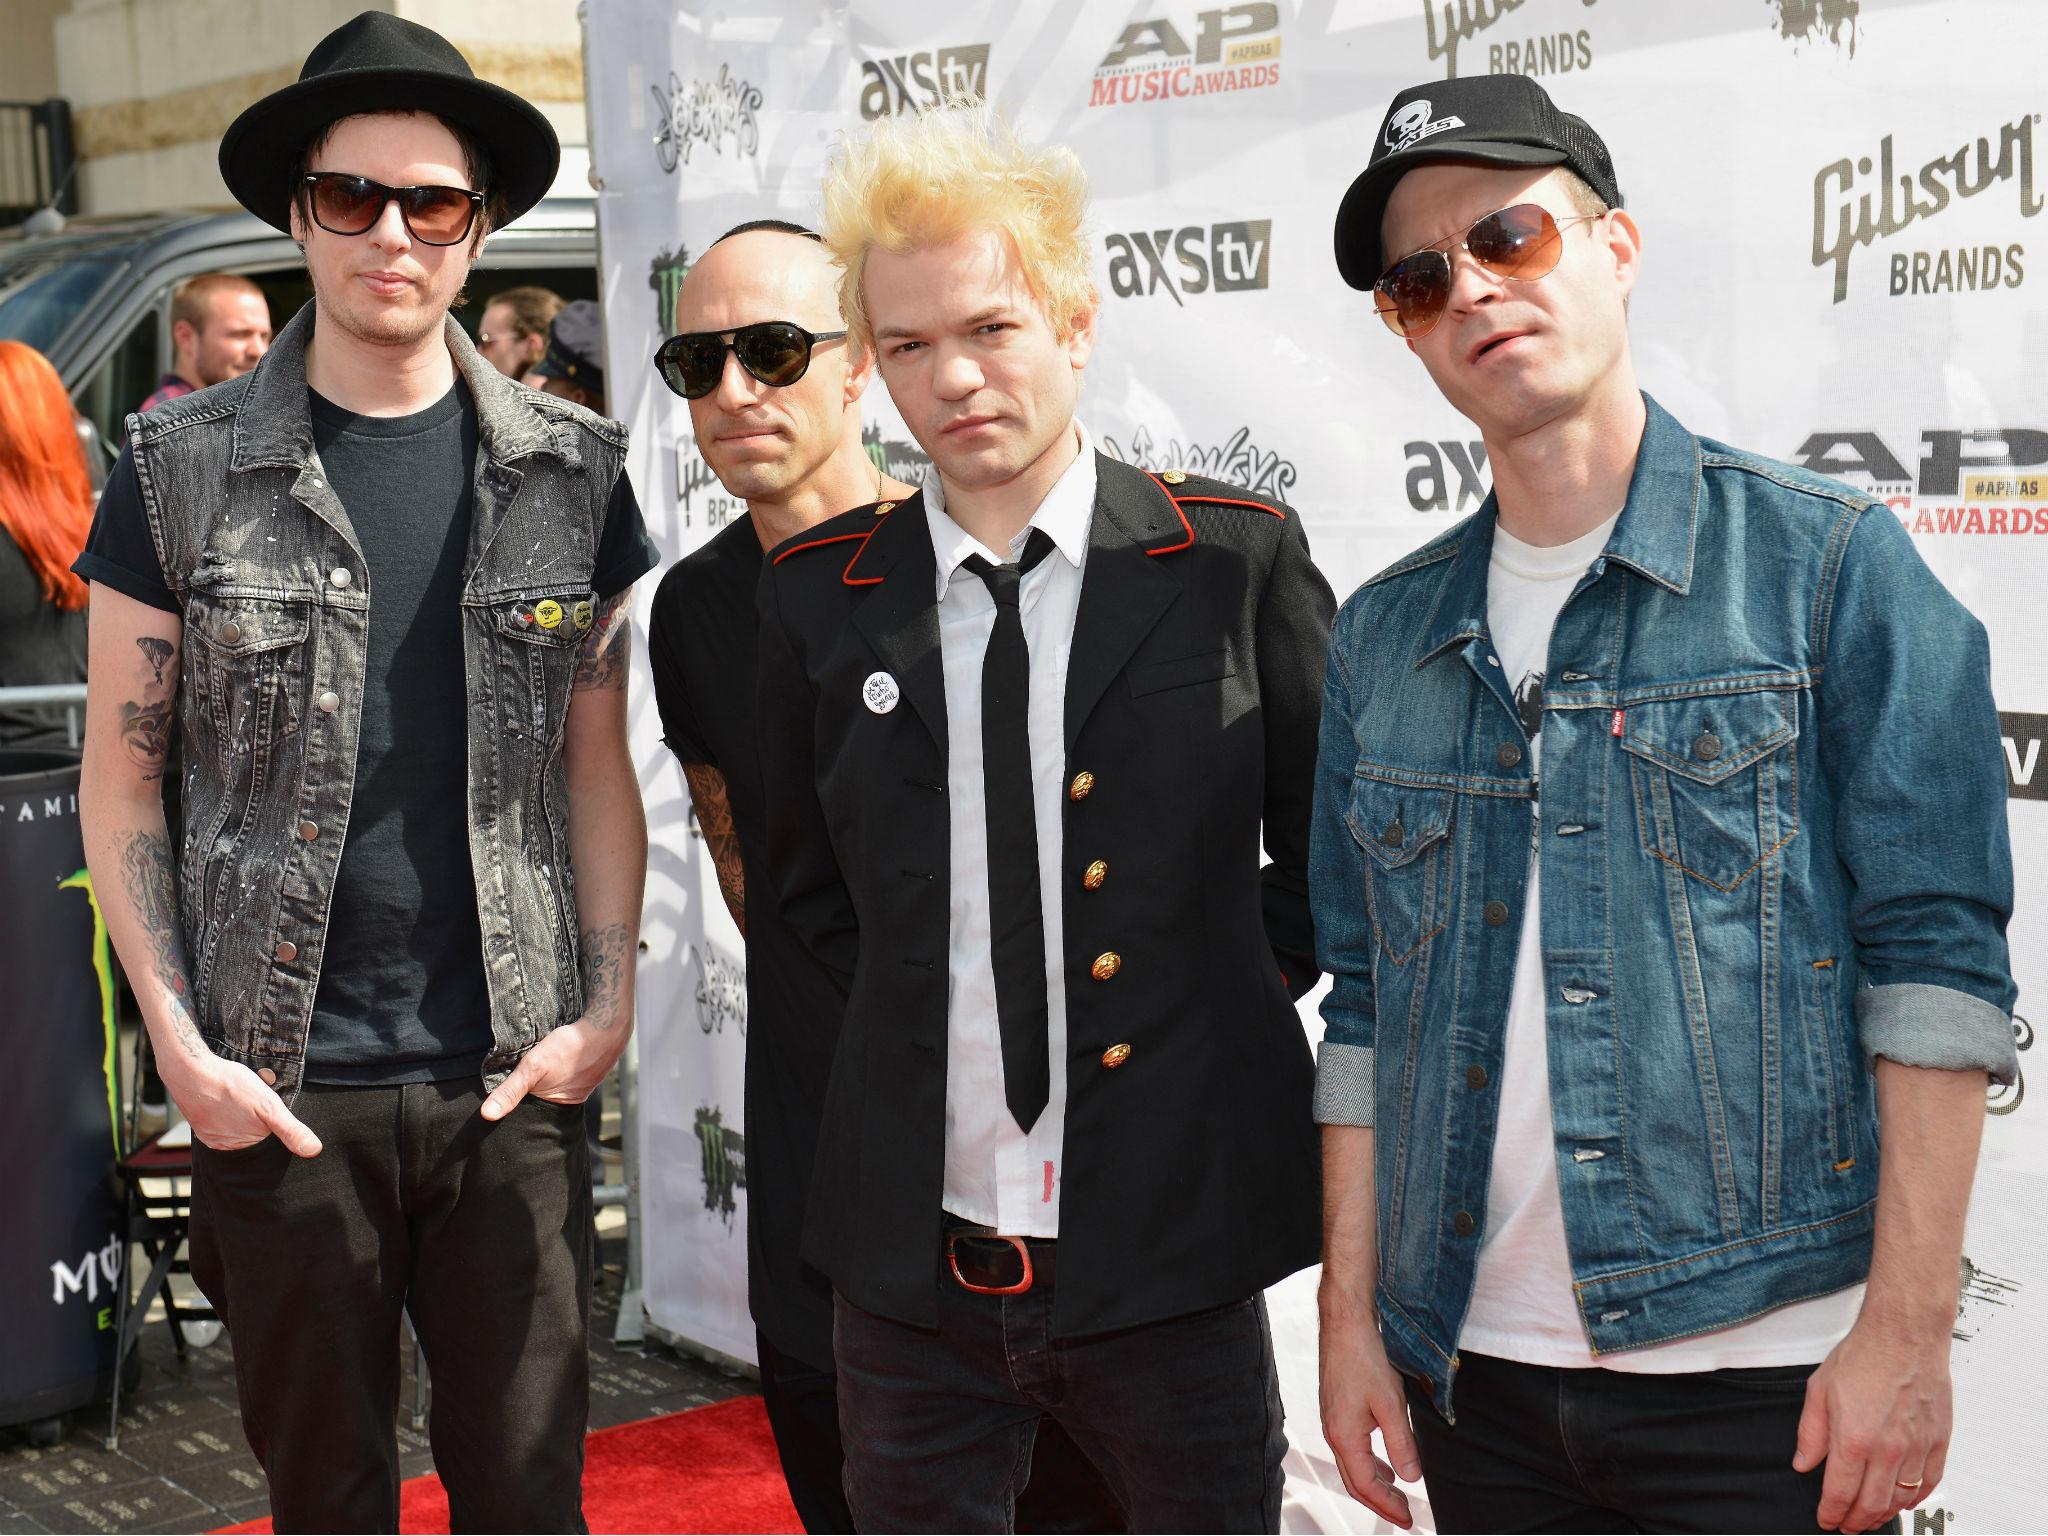 Sum 41 share details of first new album in five years 13 Voices